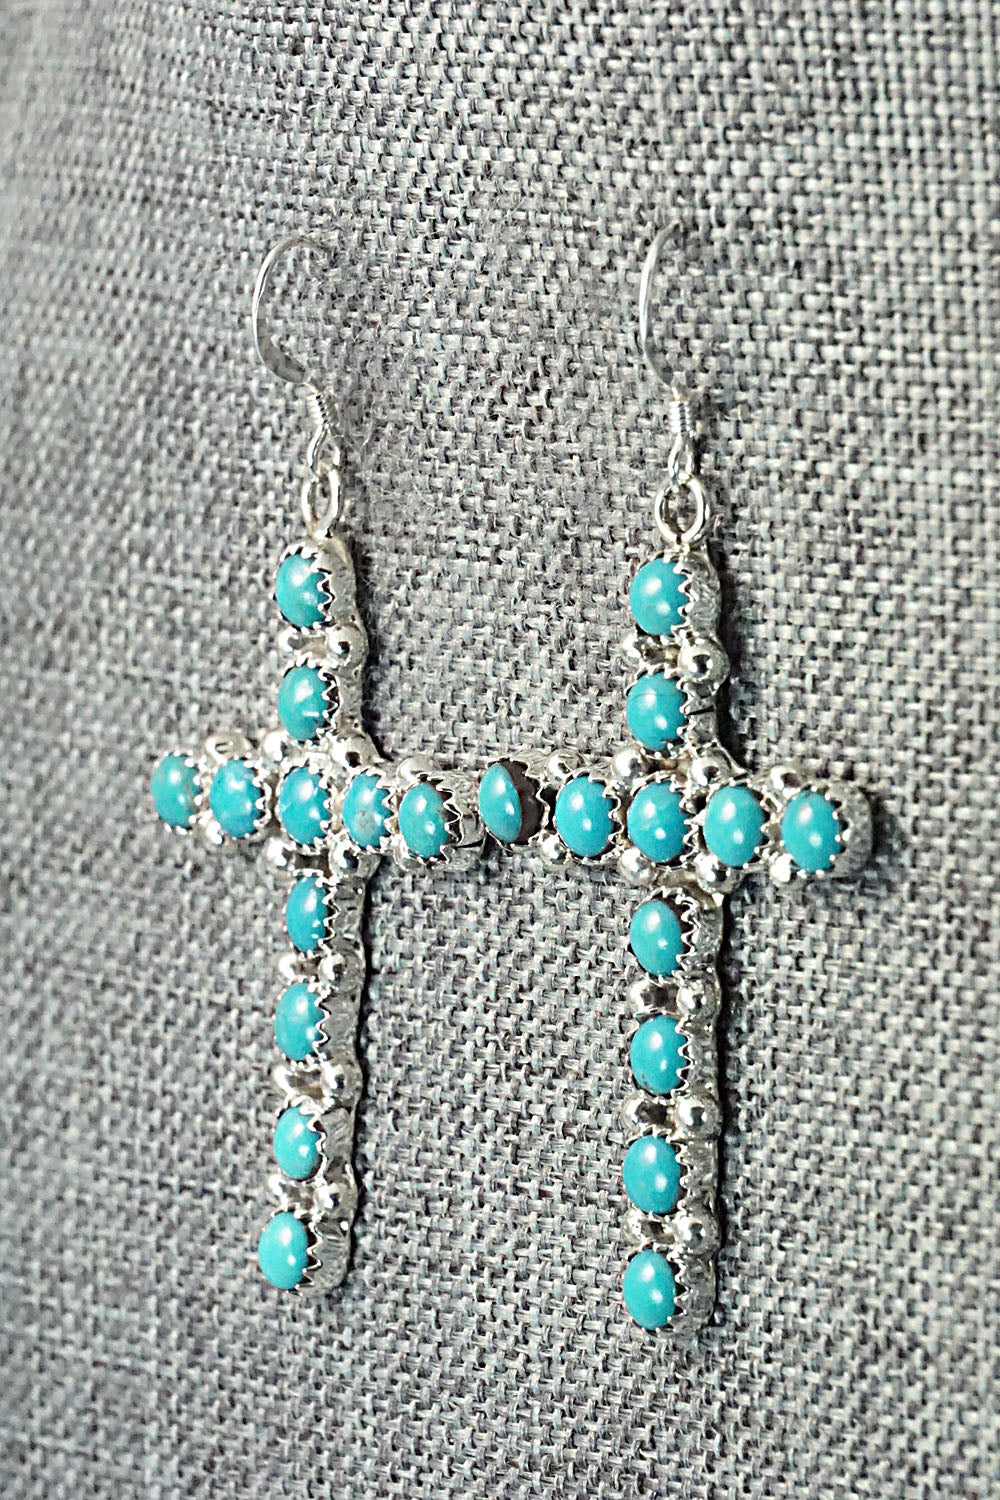 Turquoise and Sterling Silver Earrings - Roberta Begay